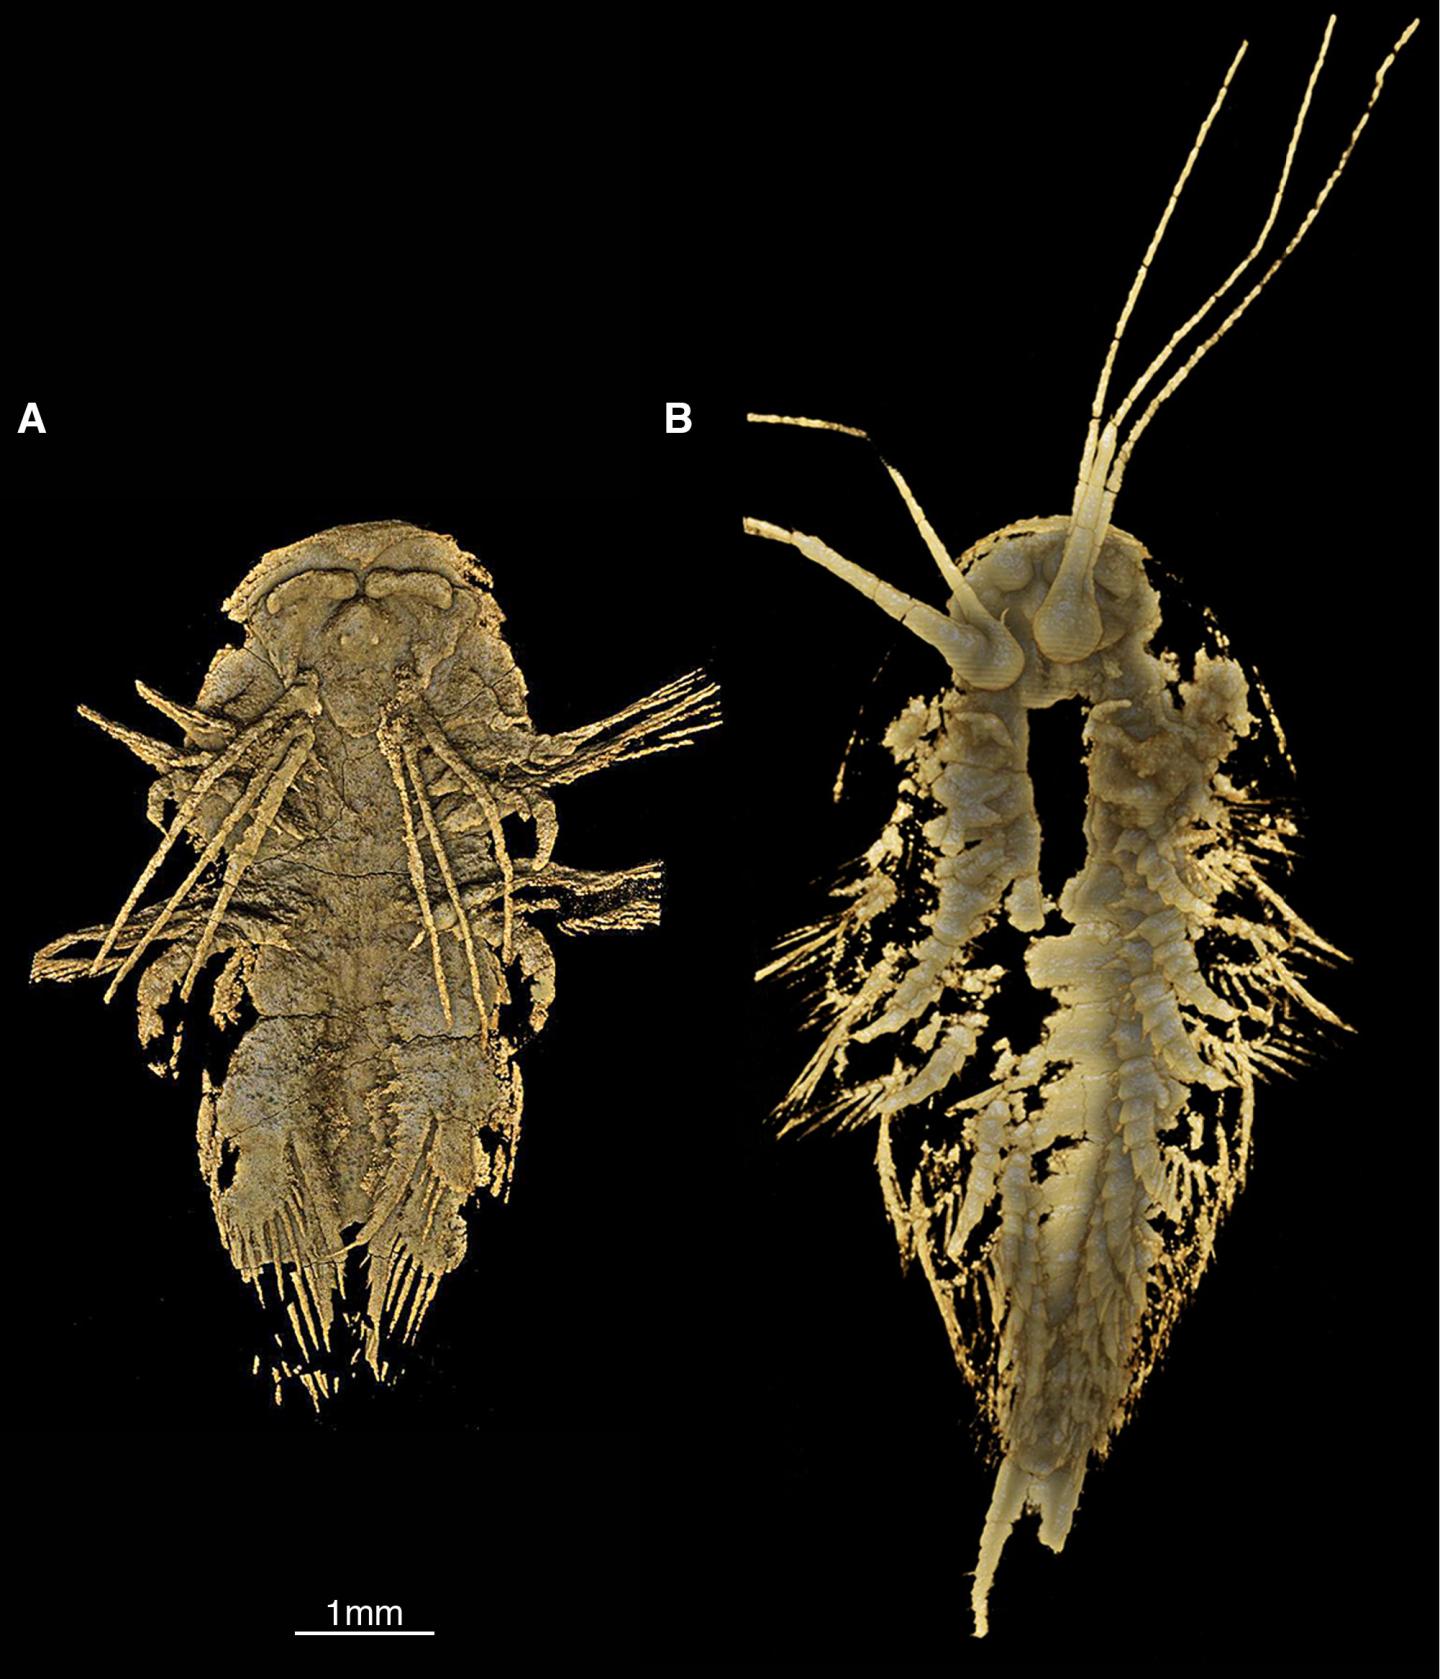 Tomographic models of Leanchoilia illecbrosa juveniles from the Cambrian (Stage 3) Chengjiang biota of South China